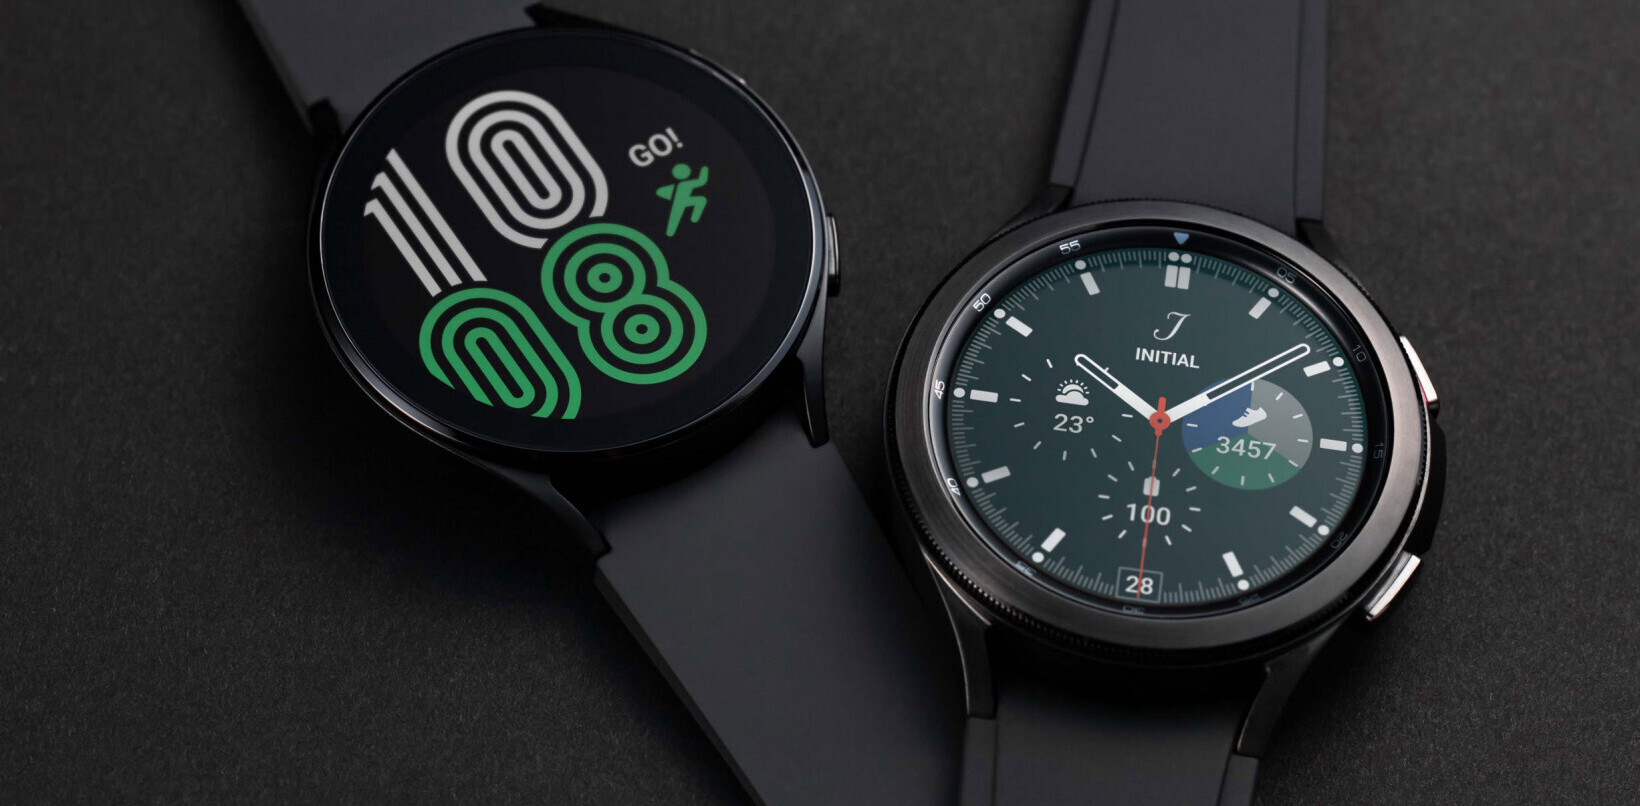 Samsung’s Galaxy Watch 4 is Android’s best Apple Watch competitor yet